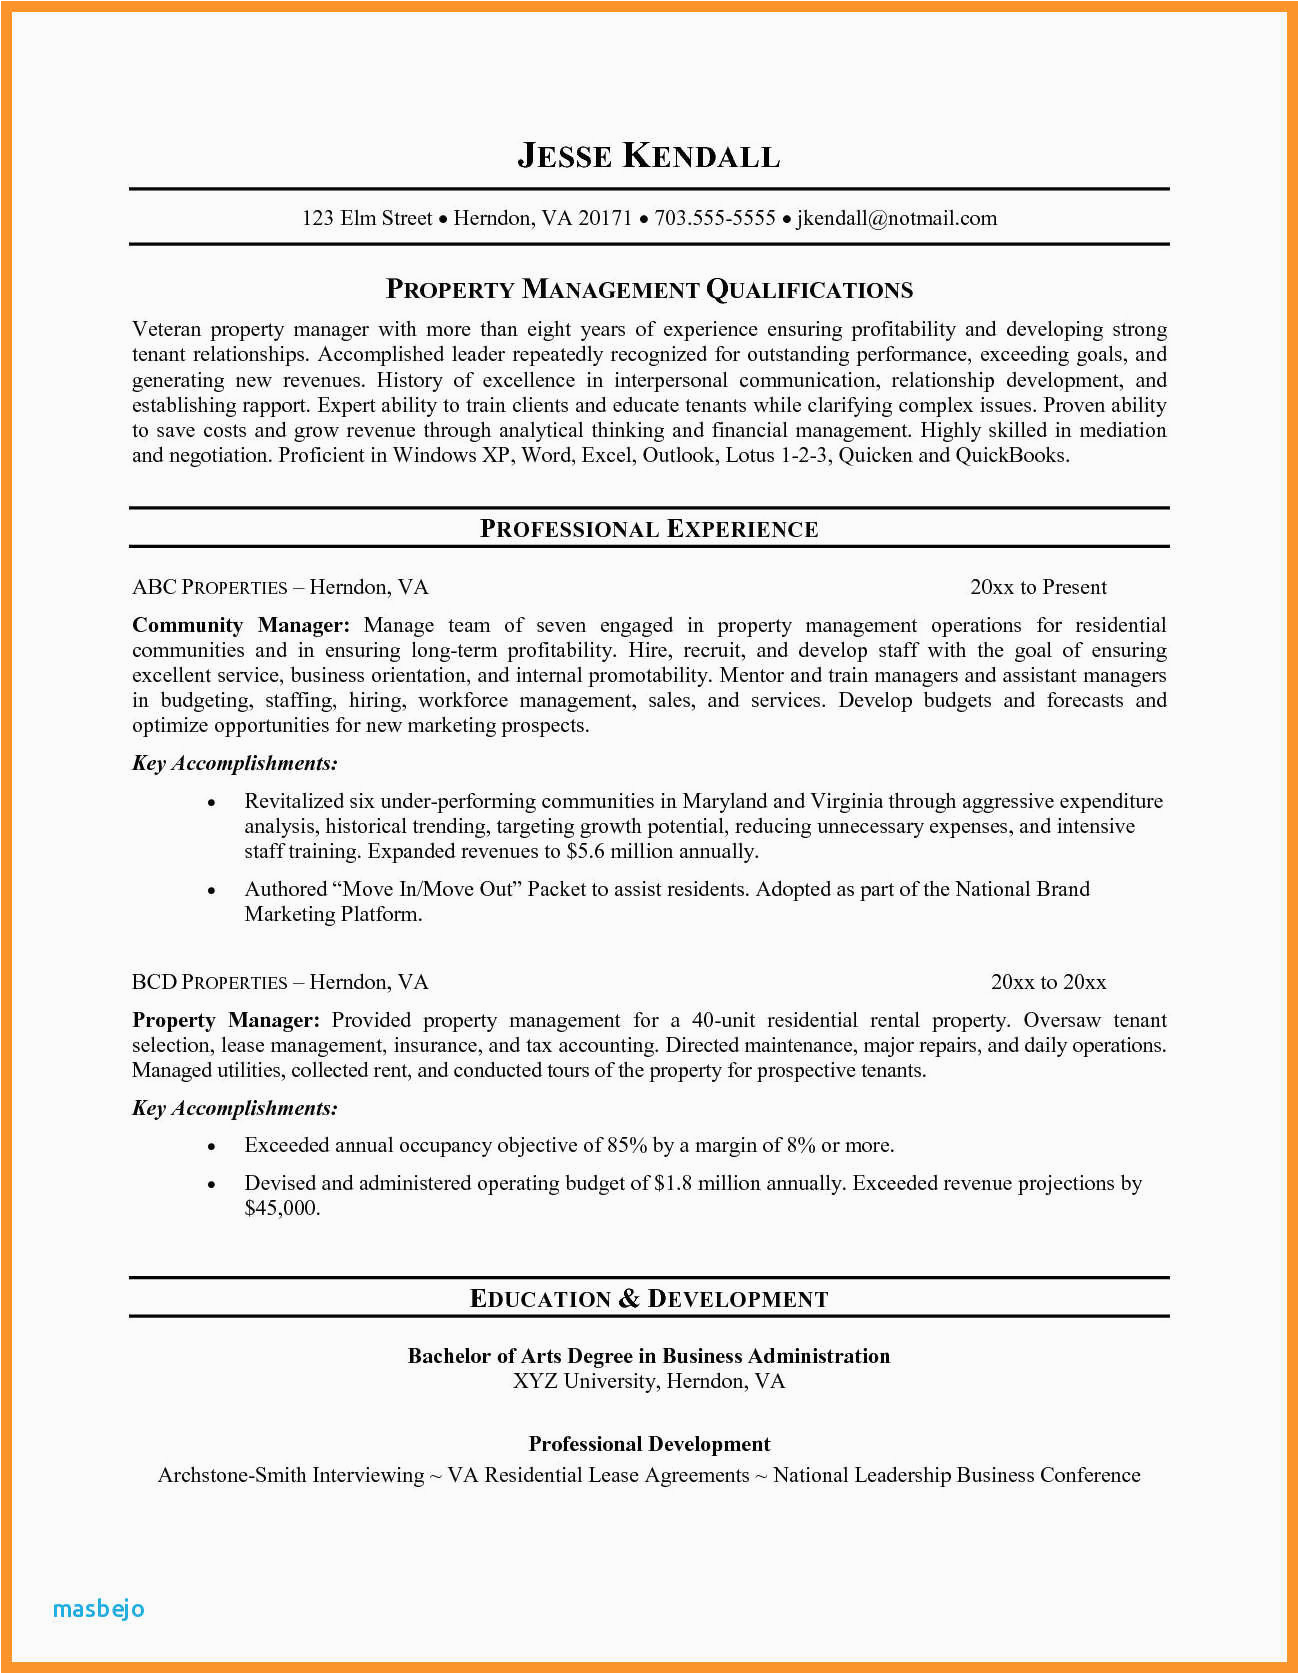 Sample Resume for Residential Property Manager 11 12 Residential Property Manager Resume Sample